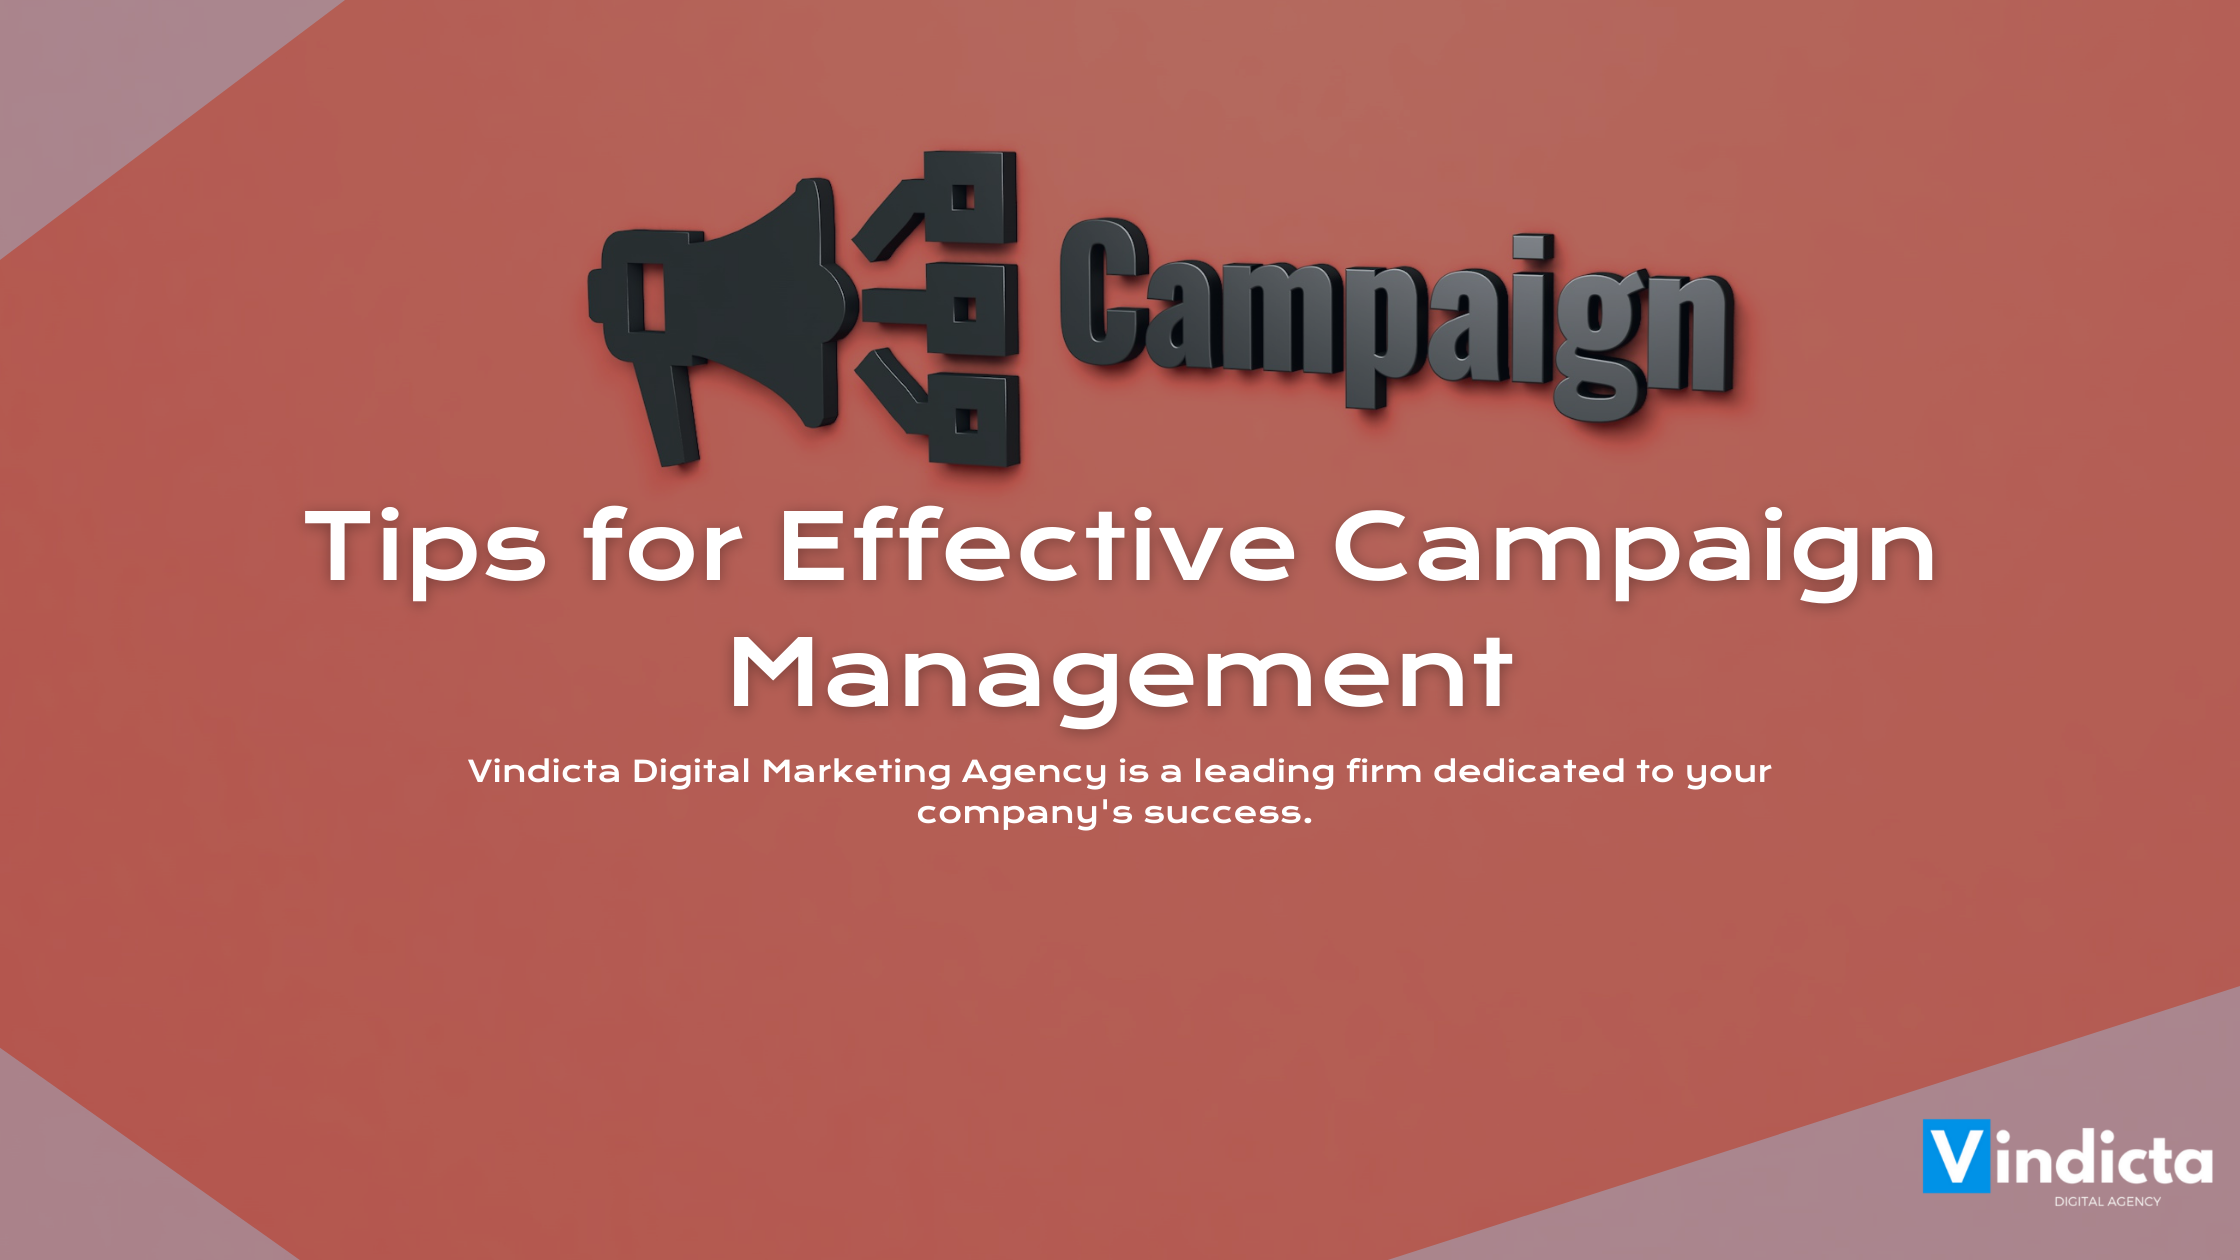 Tips for Effective Campaign Management